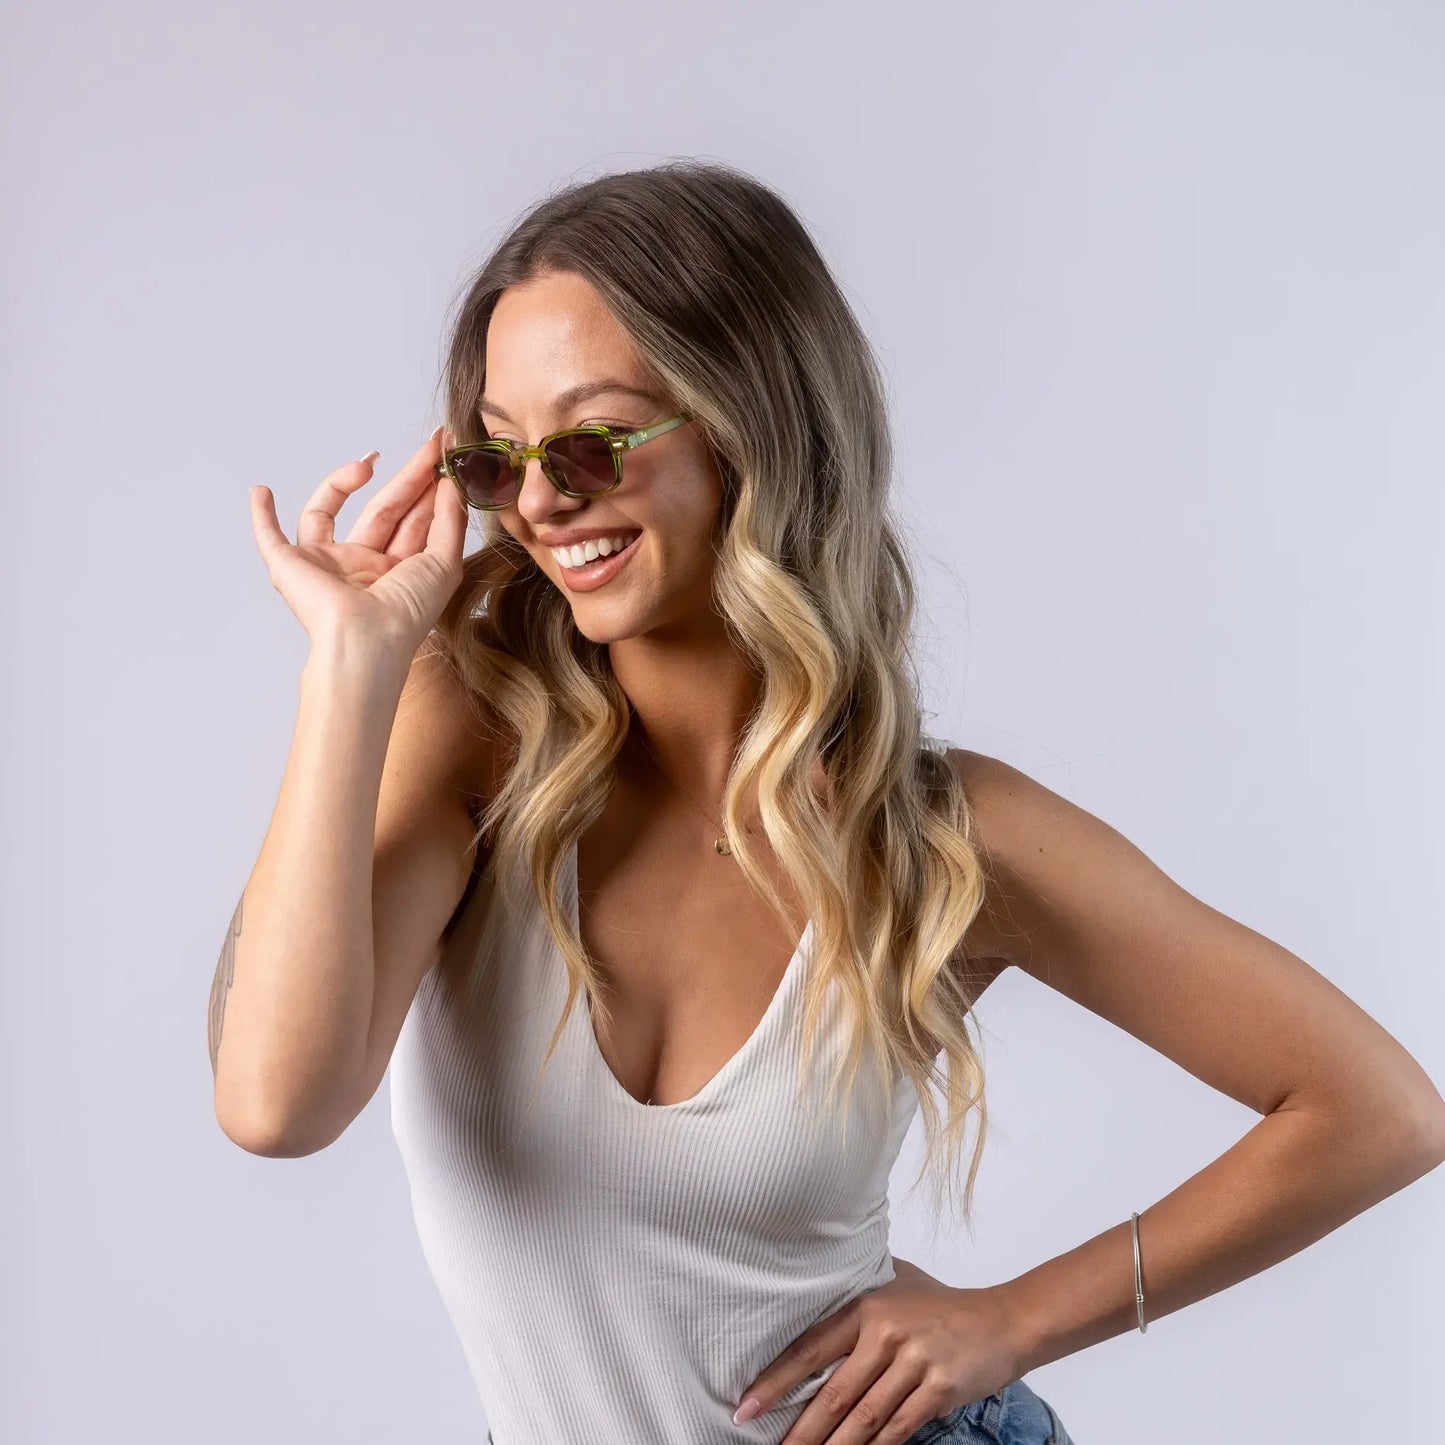 A female model wearing Exposure Sunglasses polarized sunglasses with green frames and green lenses, posing against a white background.